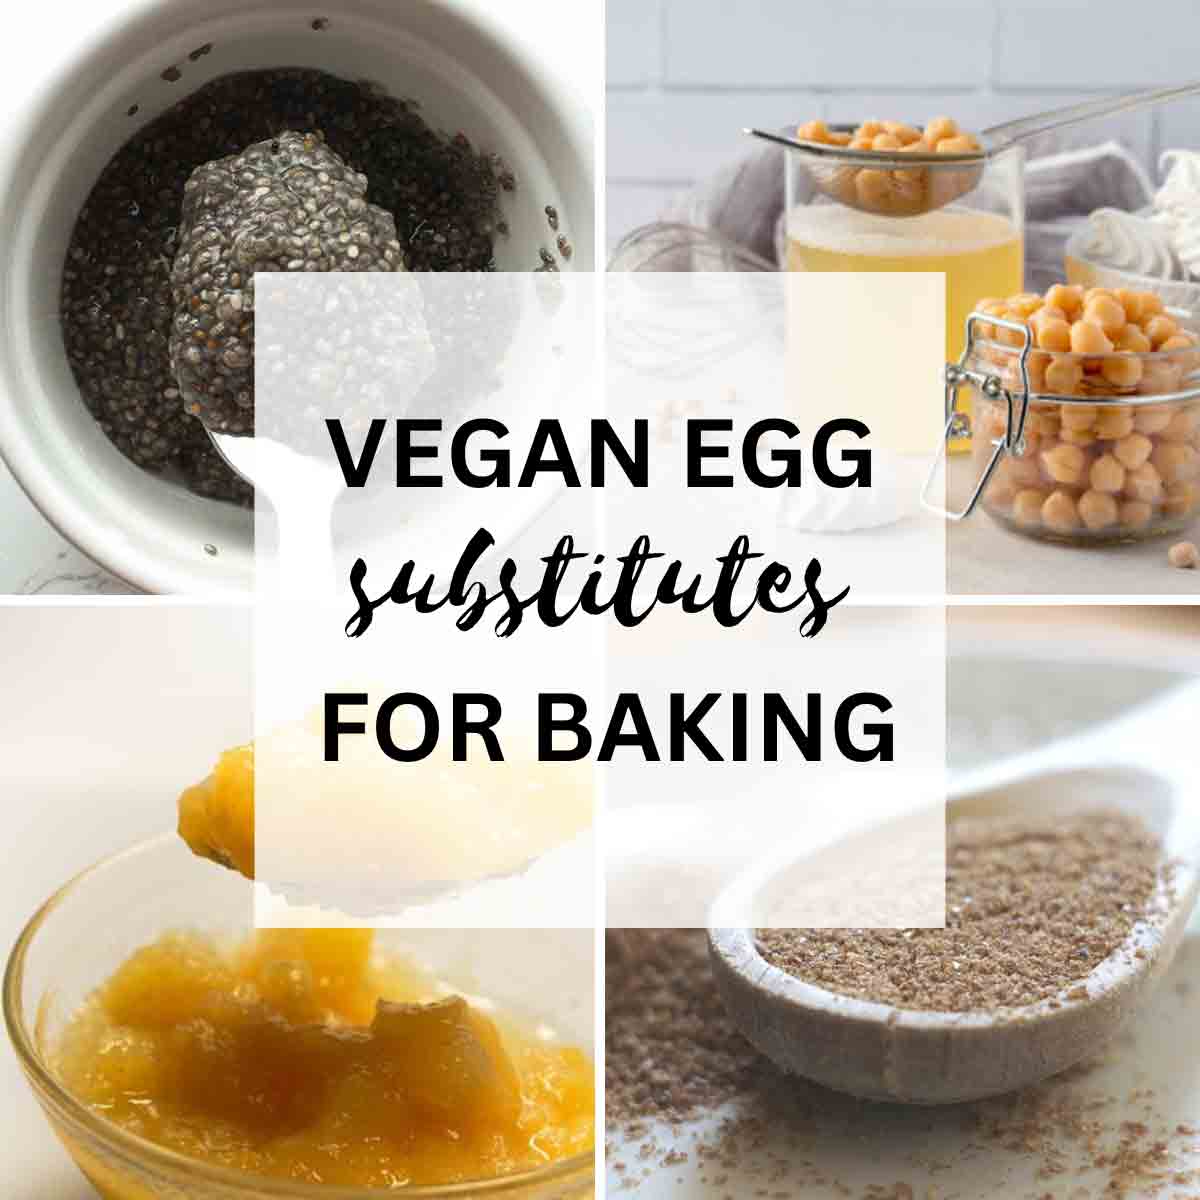 Image Of 4 Egg Substitutes With Text Overlay That Reads Vegan Egg Substitutes For Baking